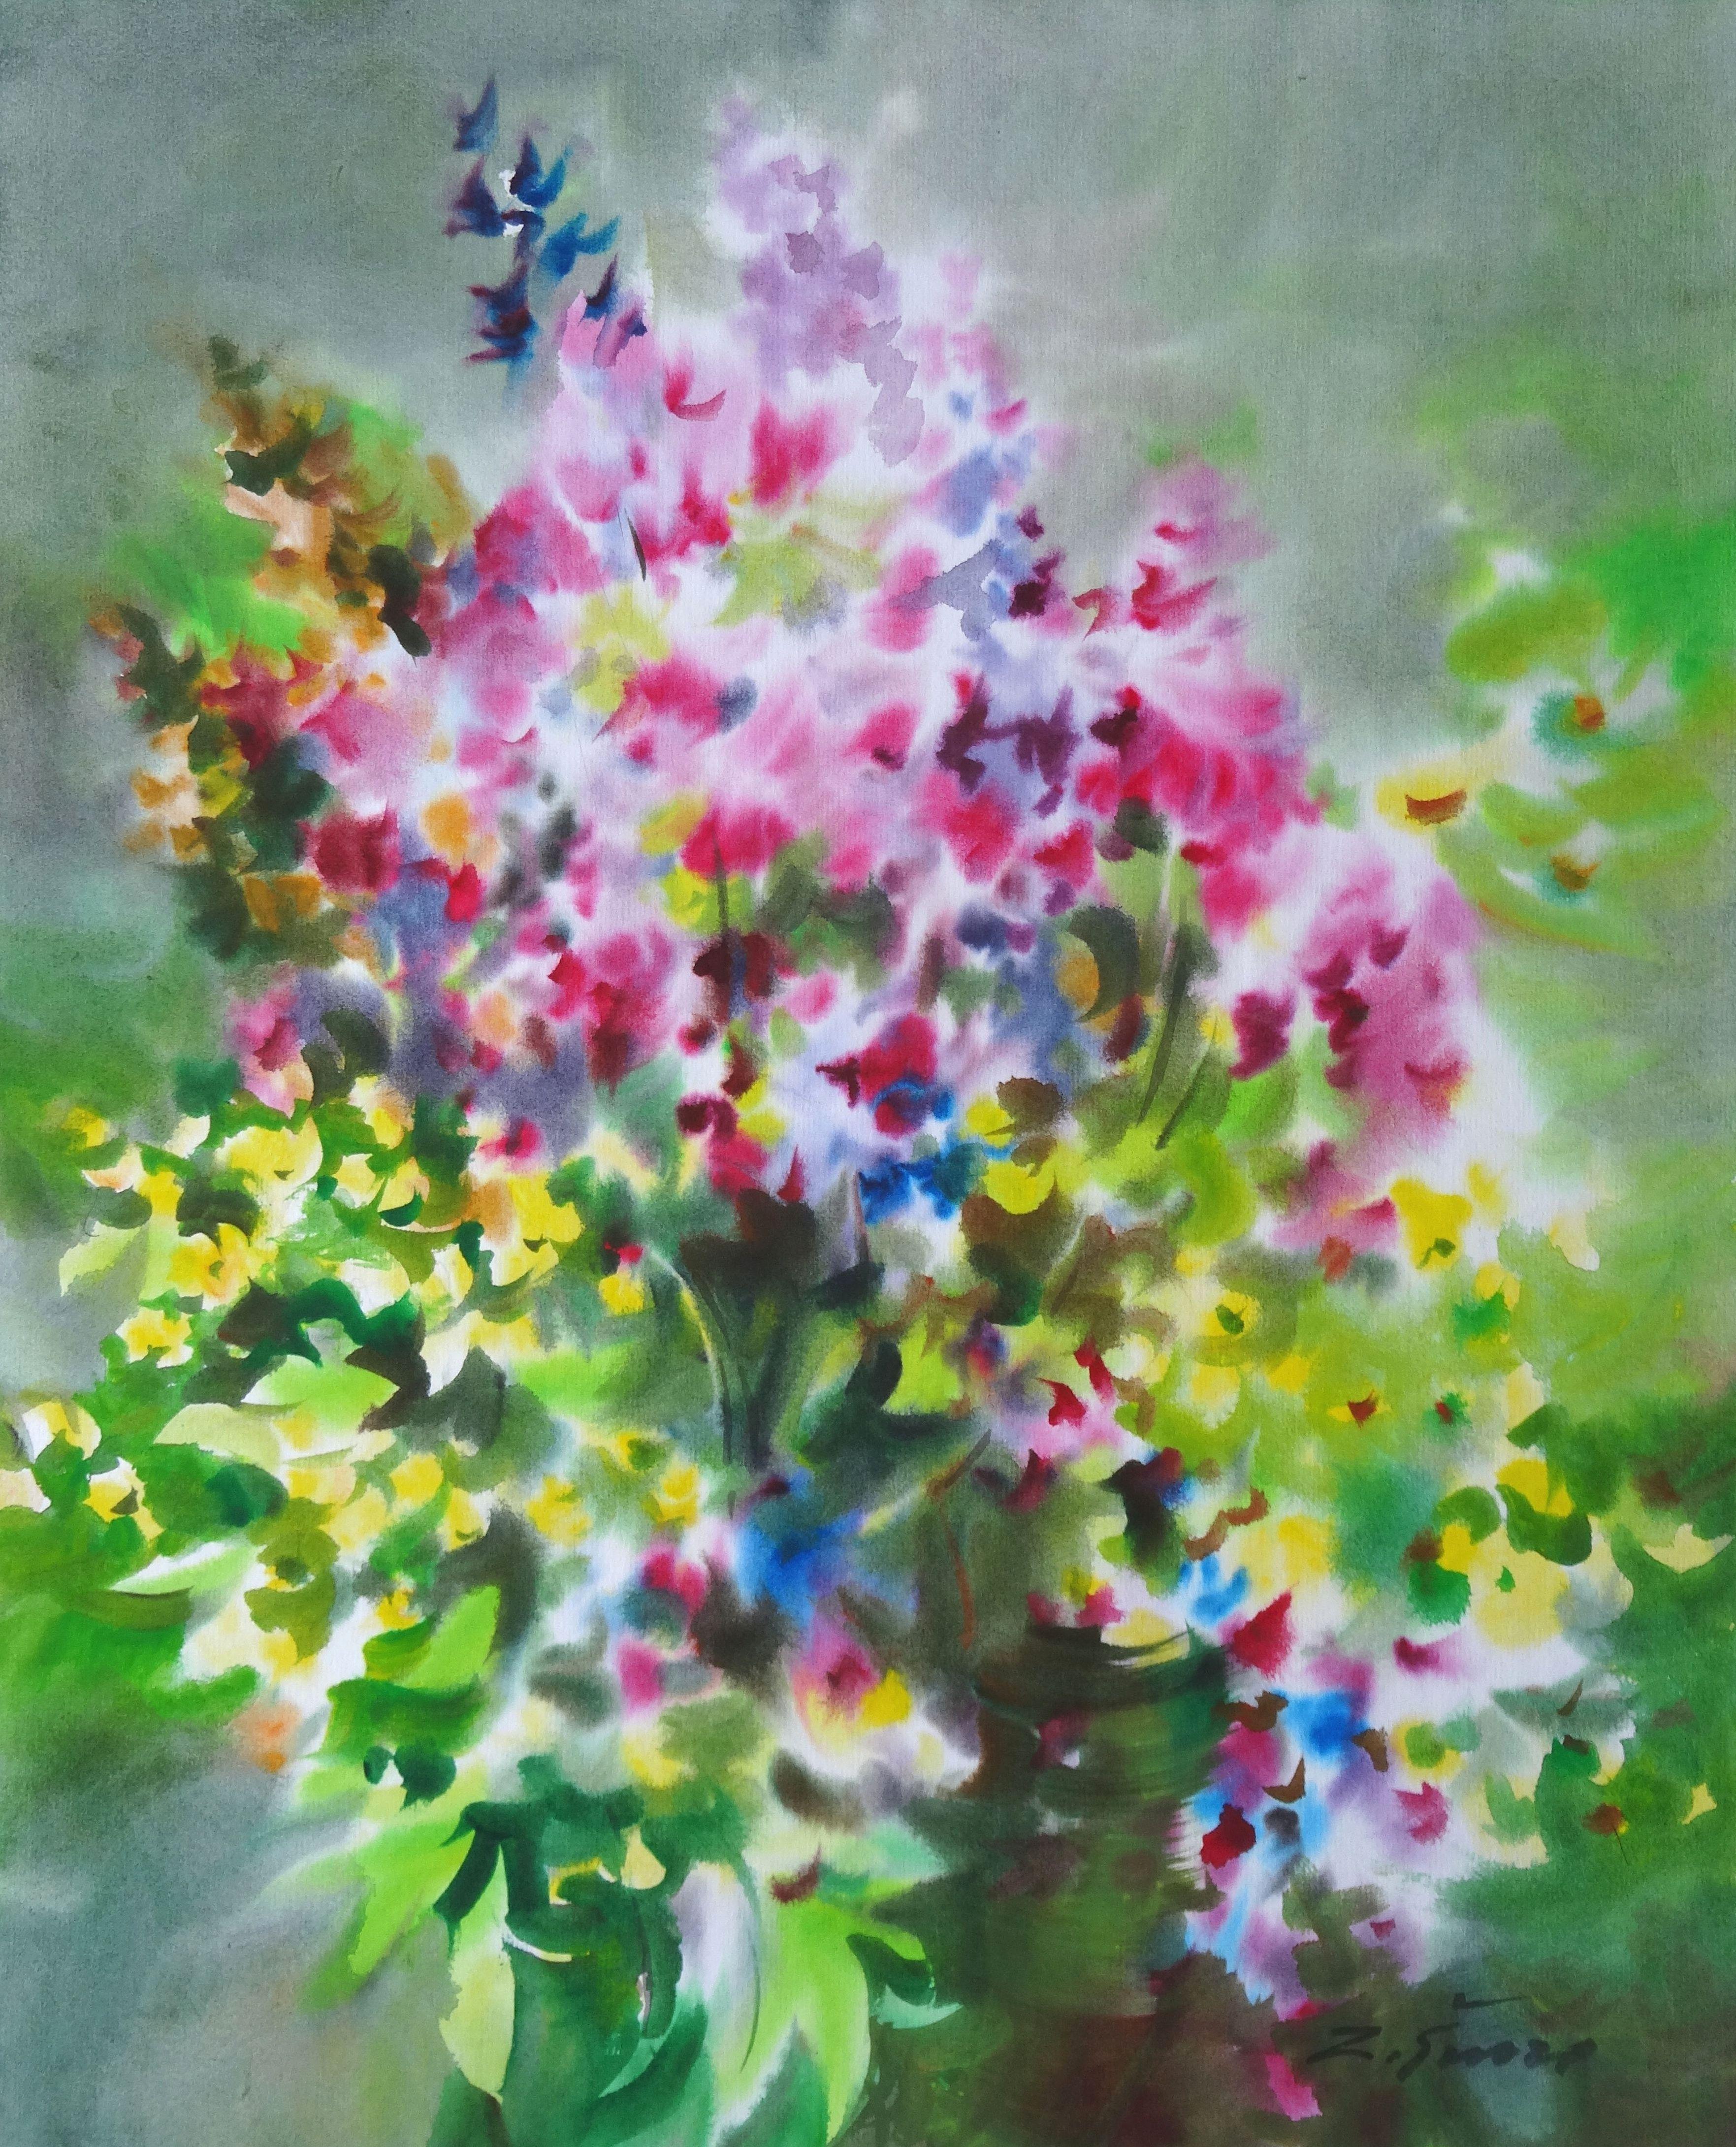 Zigmunds Snore  Still-Life Painting - Bright summer flowers. 2020. Watercolor, paper, 74 x 59 cm